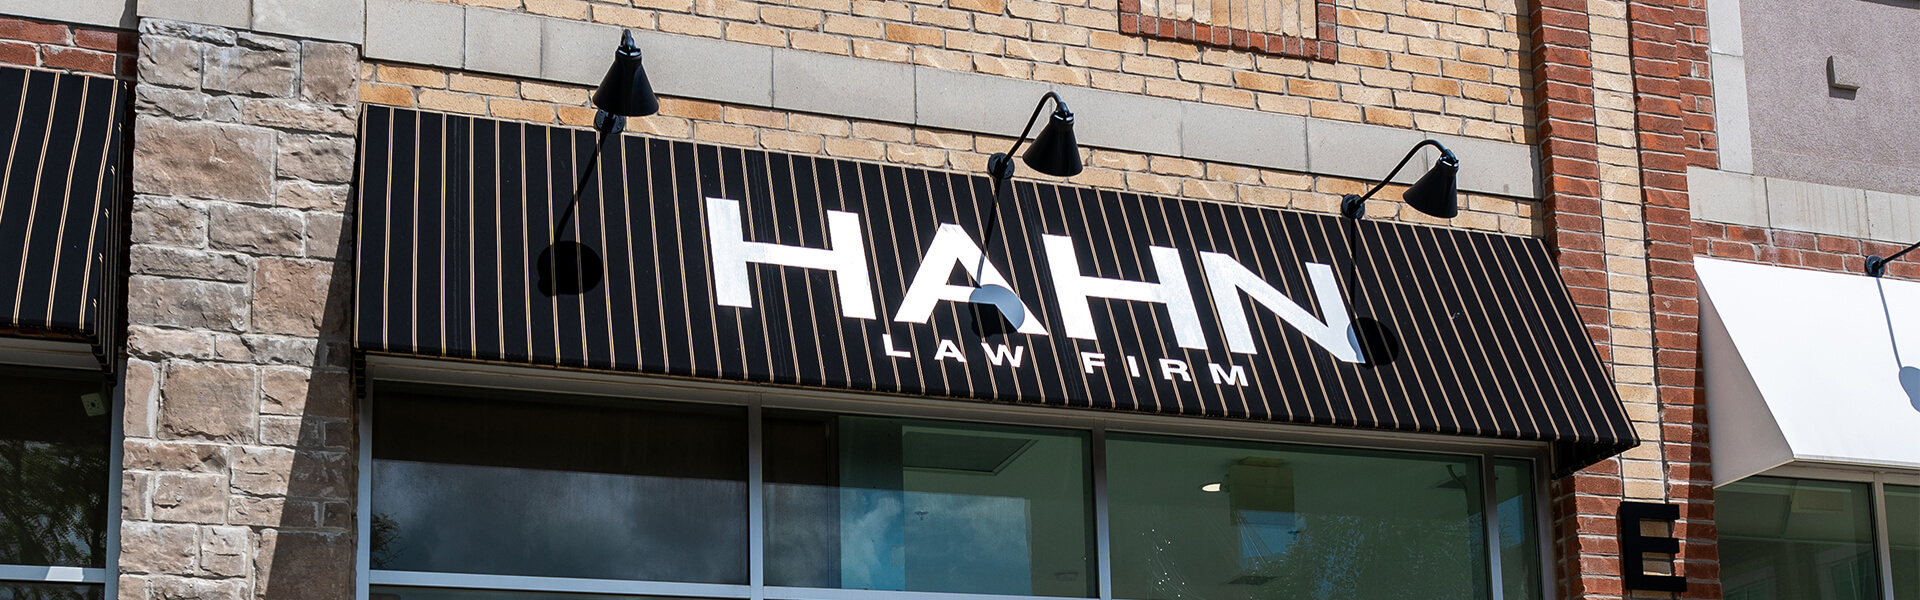 HAHN Law Firm - Exterior - Banner